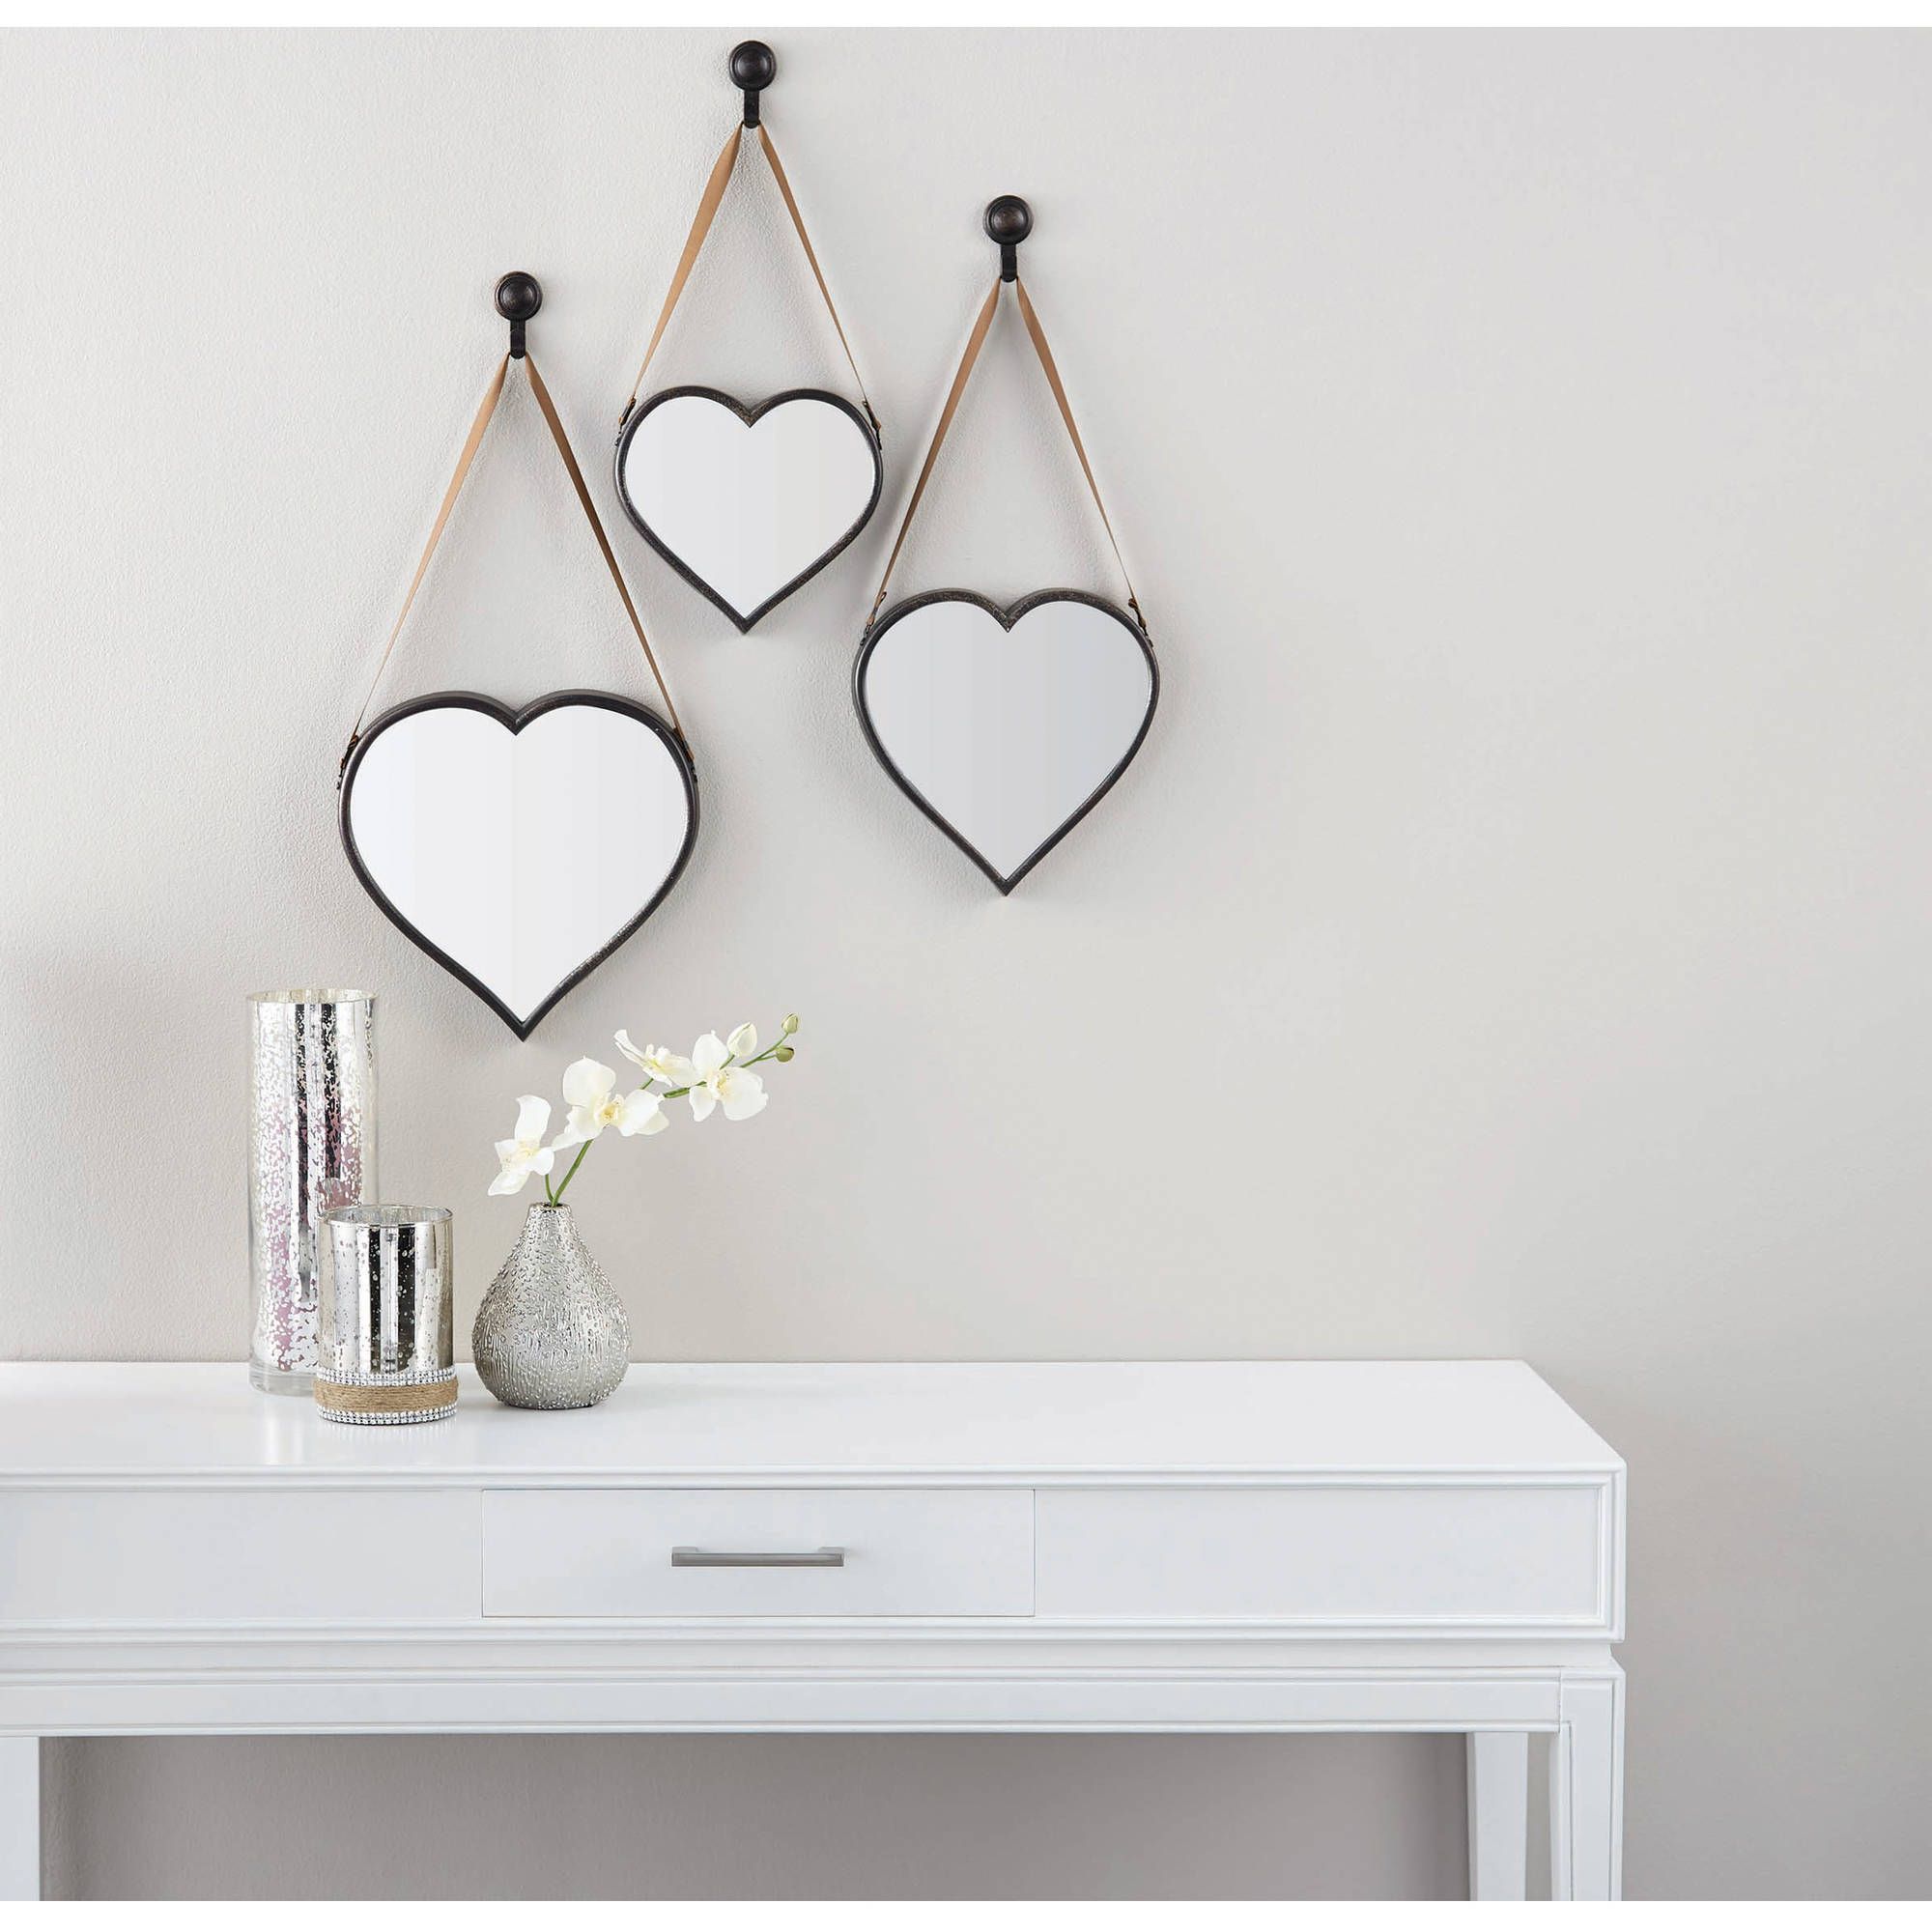 Mainstays 3 Piece Heart Mirror Set – Walmart Intended For Most Recently Released 2 Piece Heart Shaped Fan Wall Decor Sets (View 1 of 20)